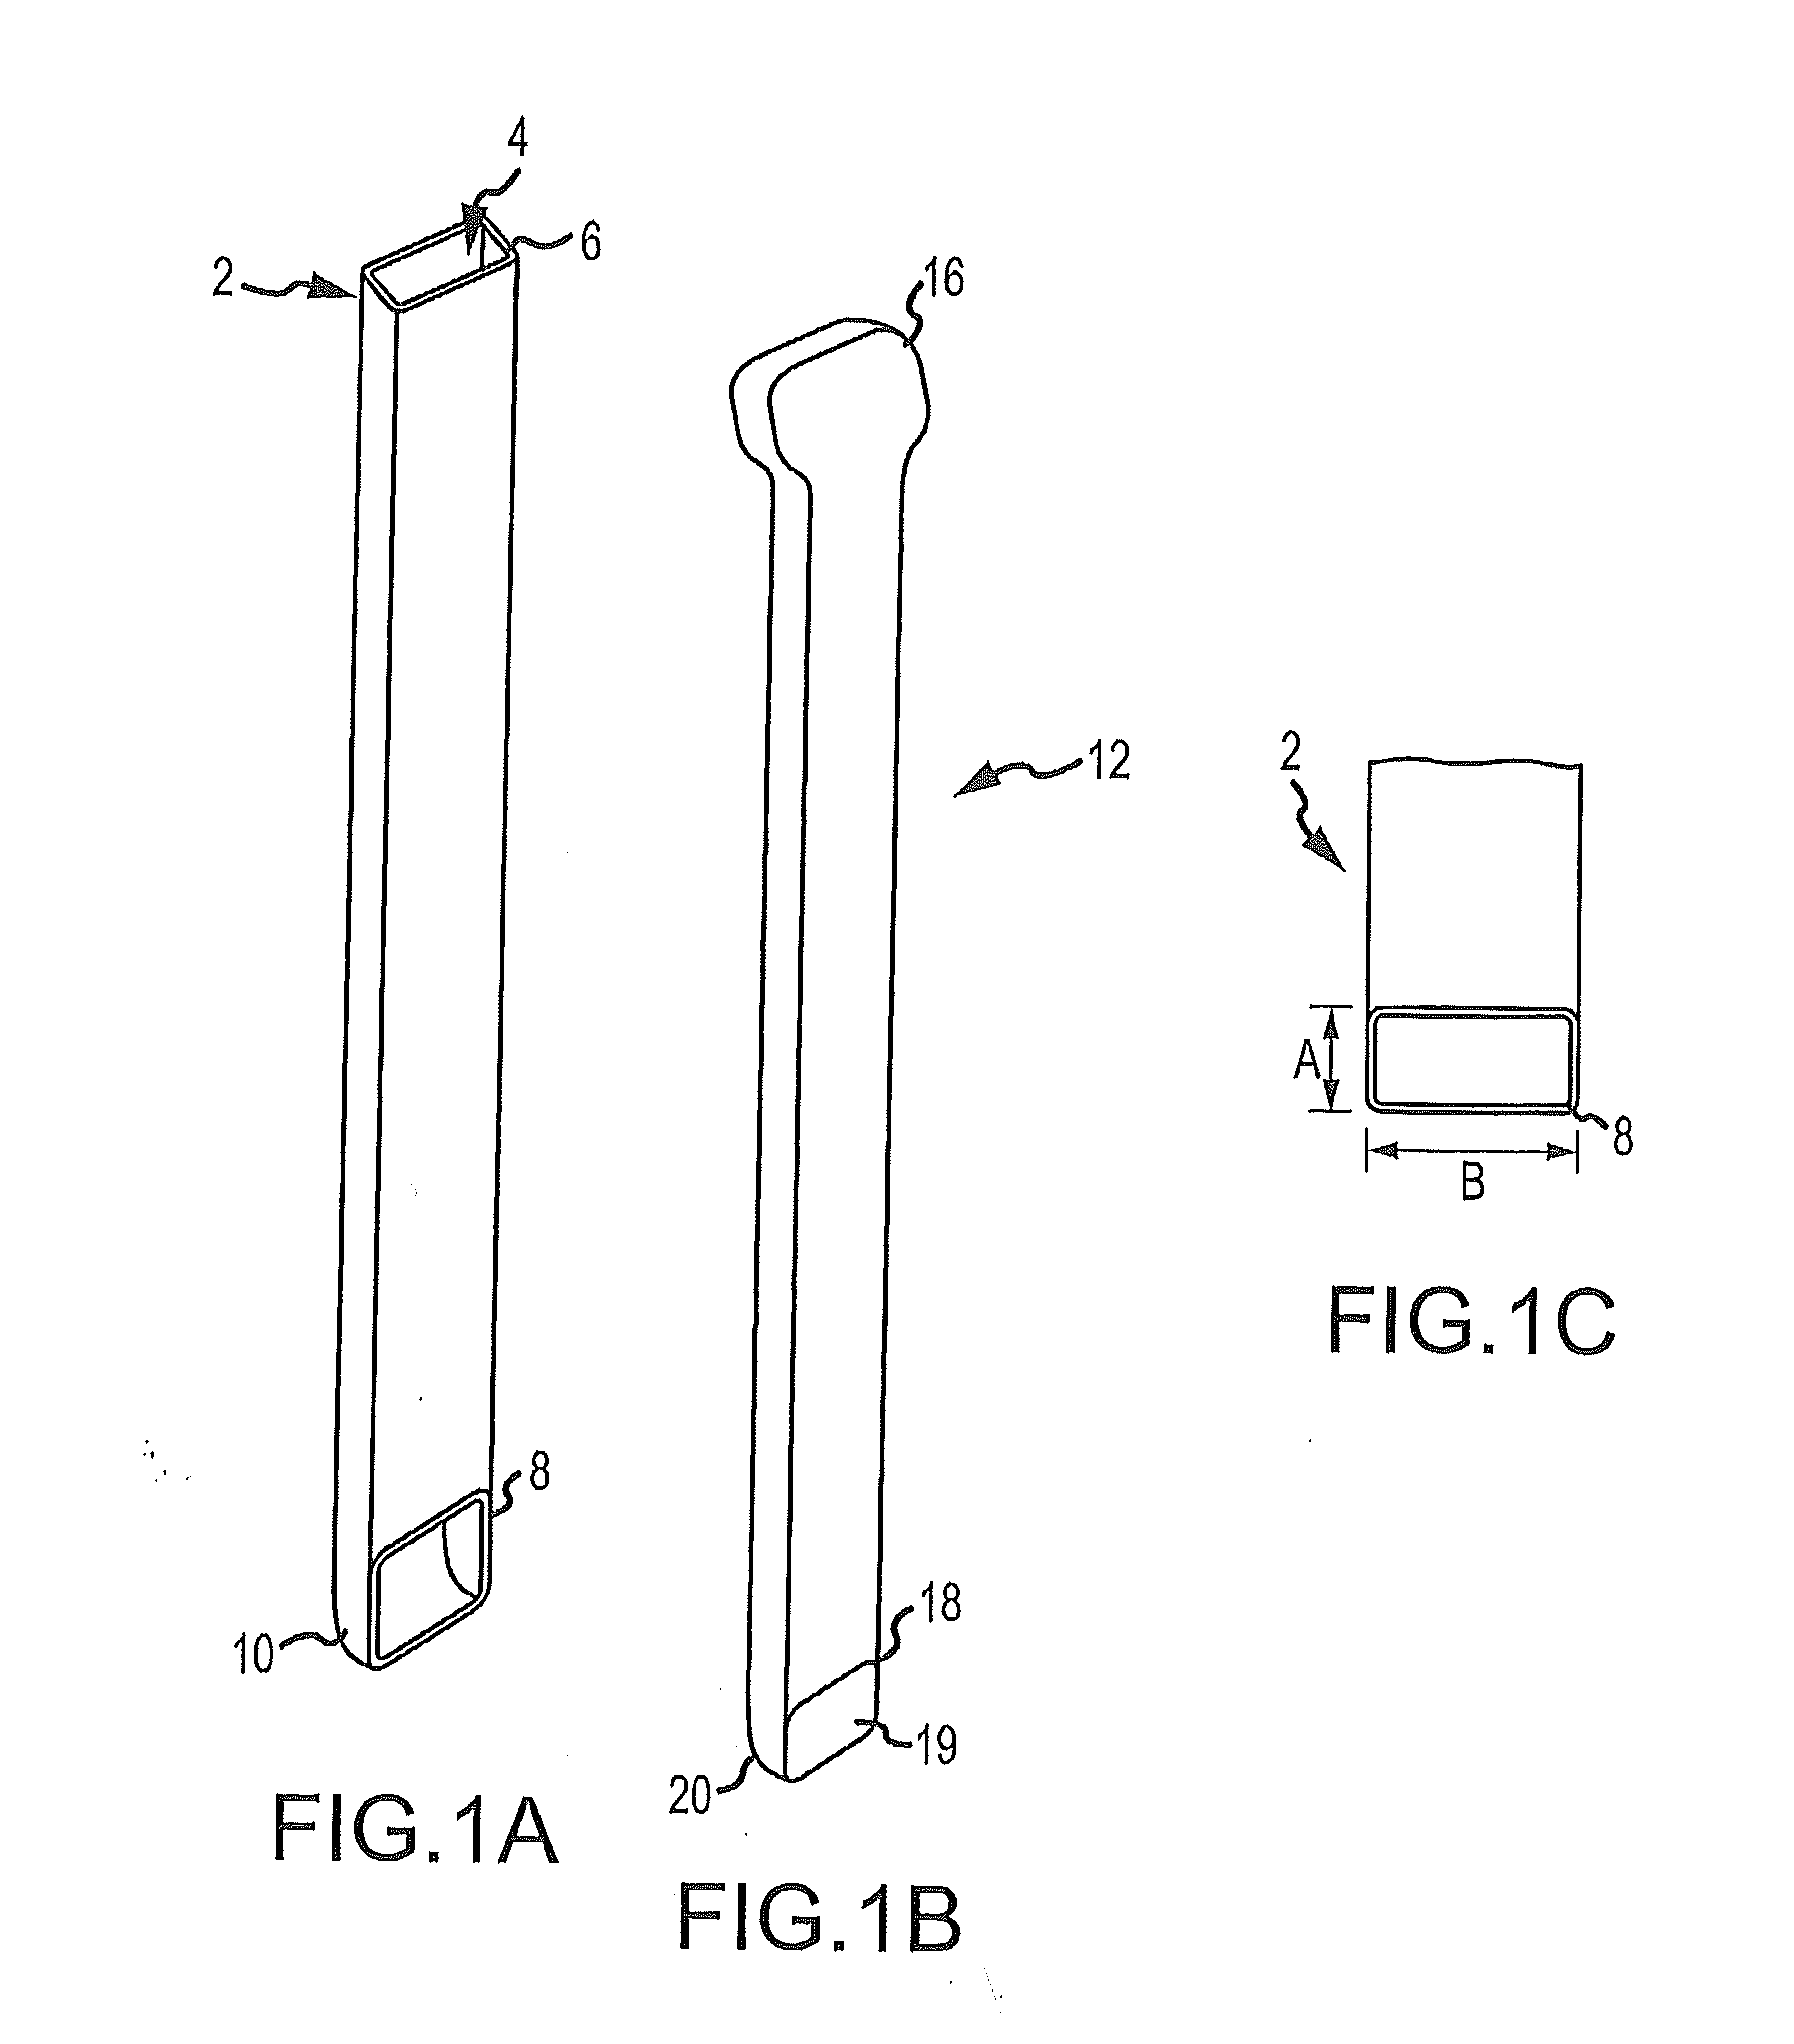 Biological delivery system with adaptable fusion cage interface